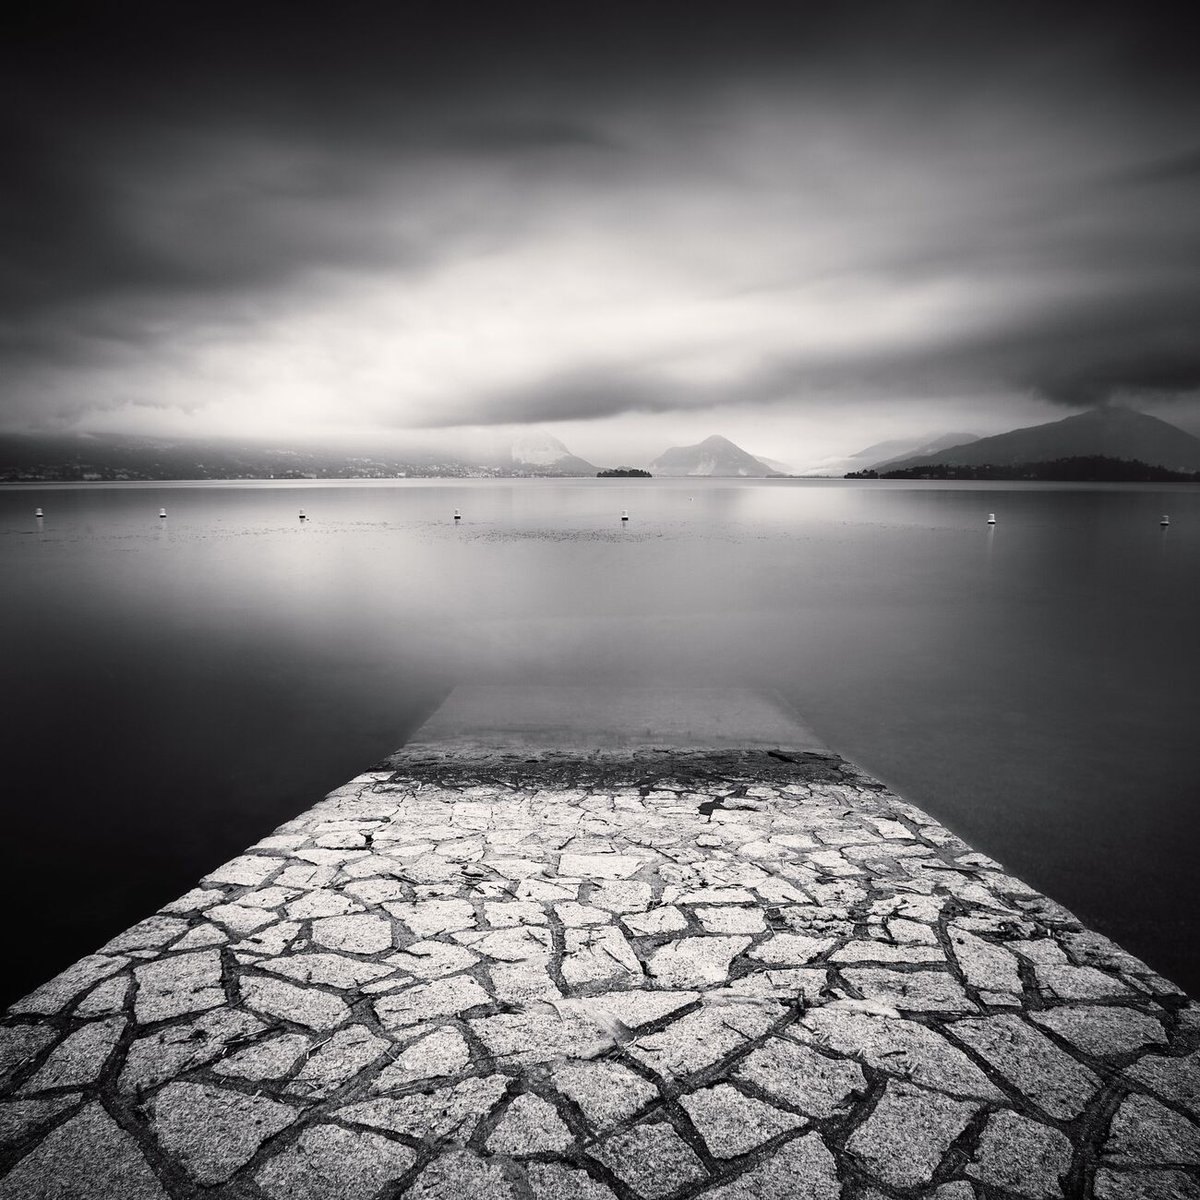 Paved Ramp, Etude 2, Lake Maggiore, Italy. August 2014. Ref-11534: Get prints denisolivier.com/photography/pa…
#maggiore #canoneos #photographerlife #italy #rain #lake #meandmymanfrotto #canon5d #canon #blackwhite #mountain #dslr #blackandwhite #hoya #rainy #boat @canonusaimaging #paved…